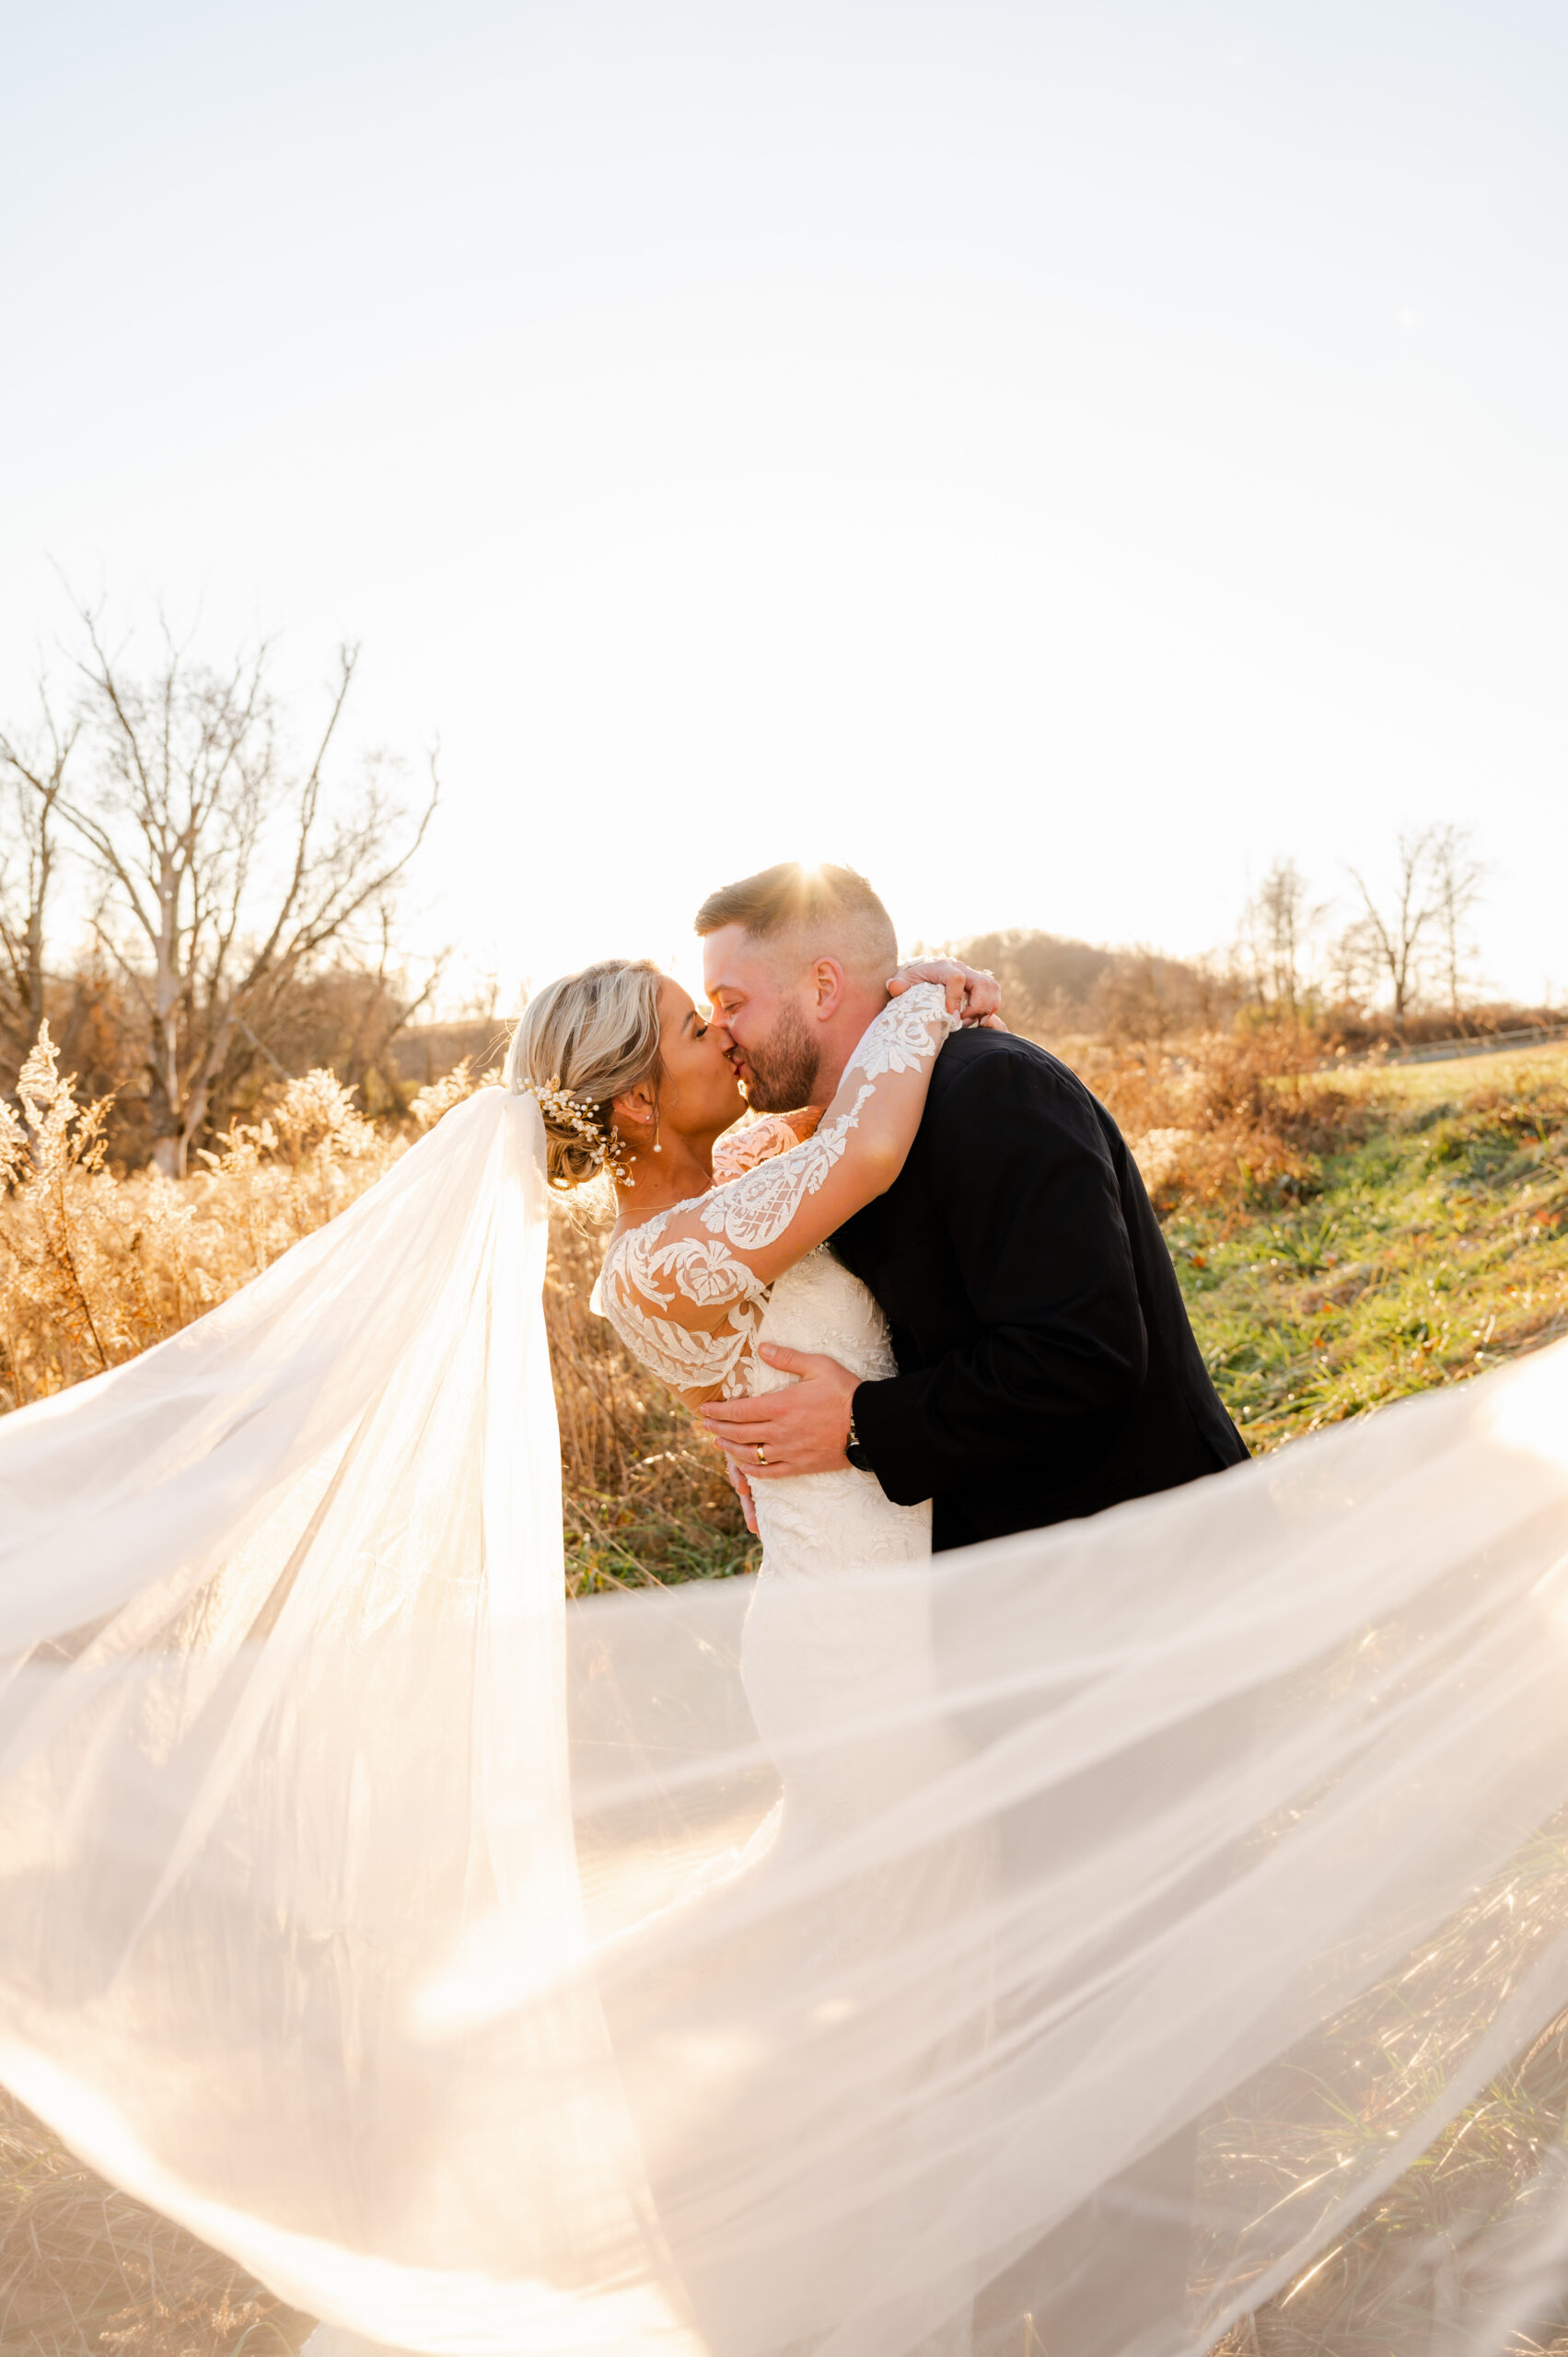 A photo of a bride and groom kissing outside with the bride's veil flowing in the wind. The sun shines bright behind the couple.